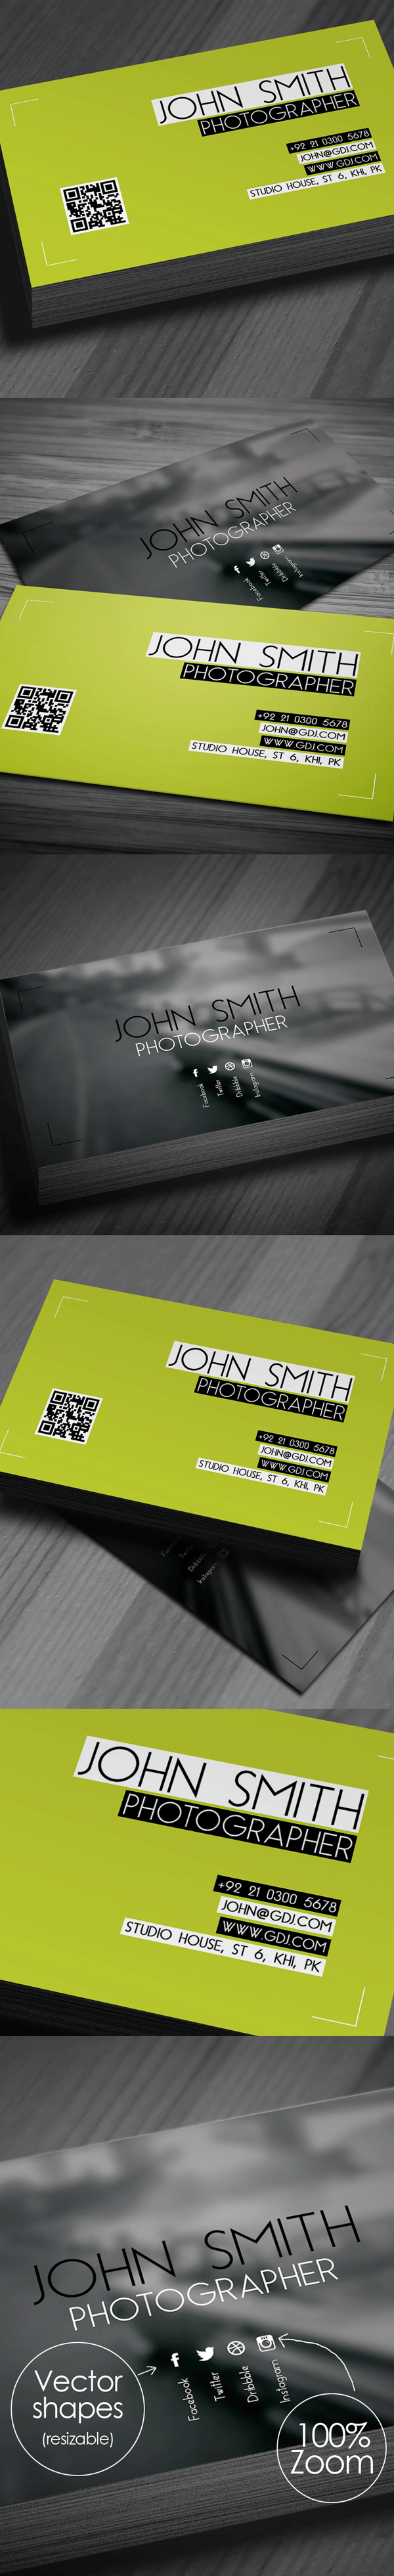 photographer-business-card-psd-template-preview